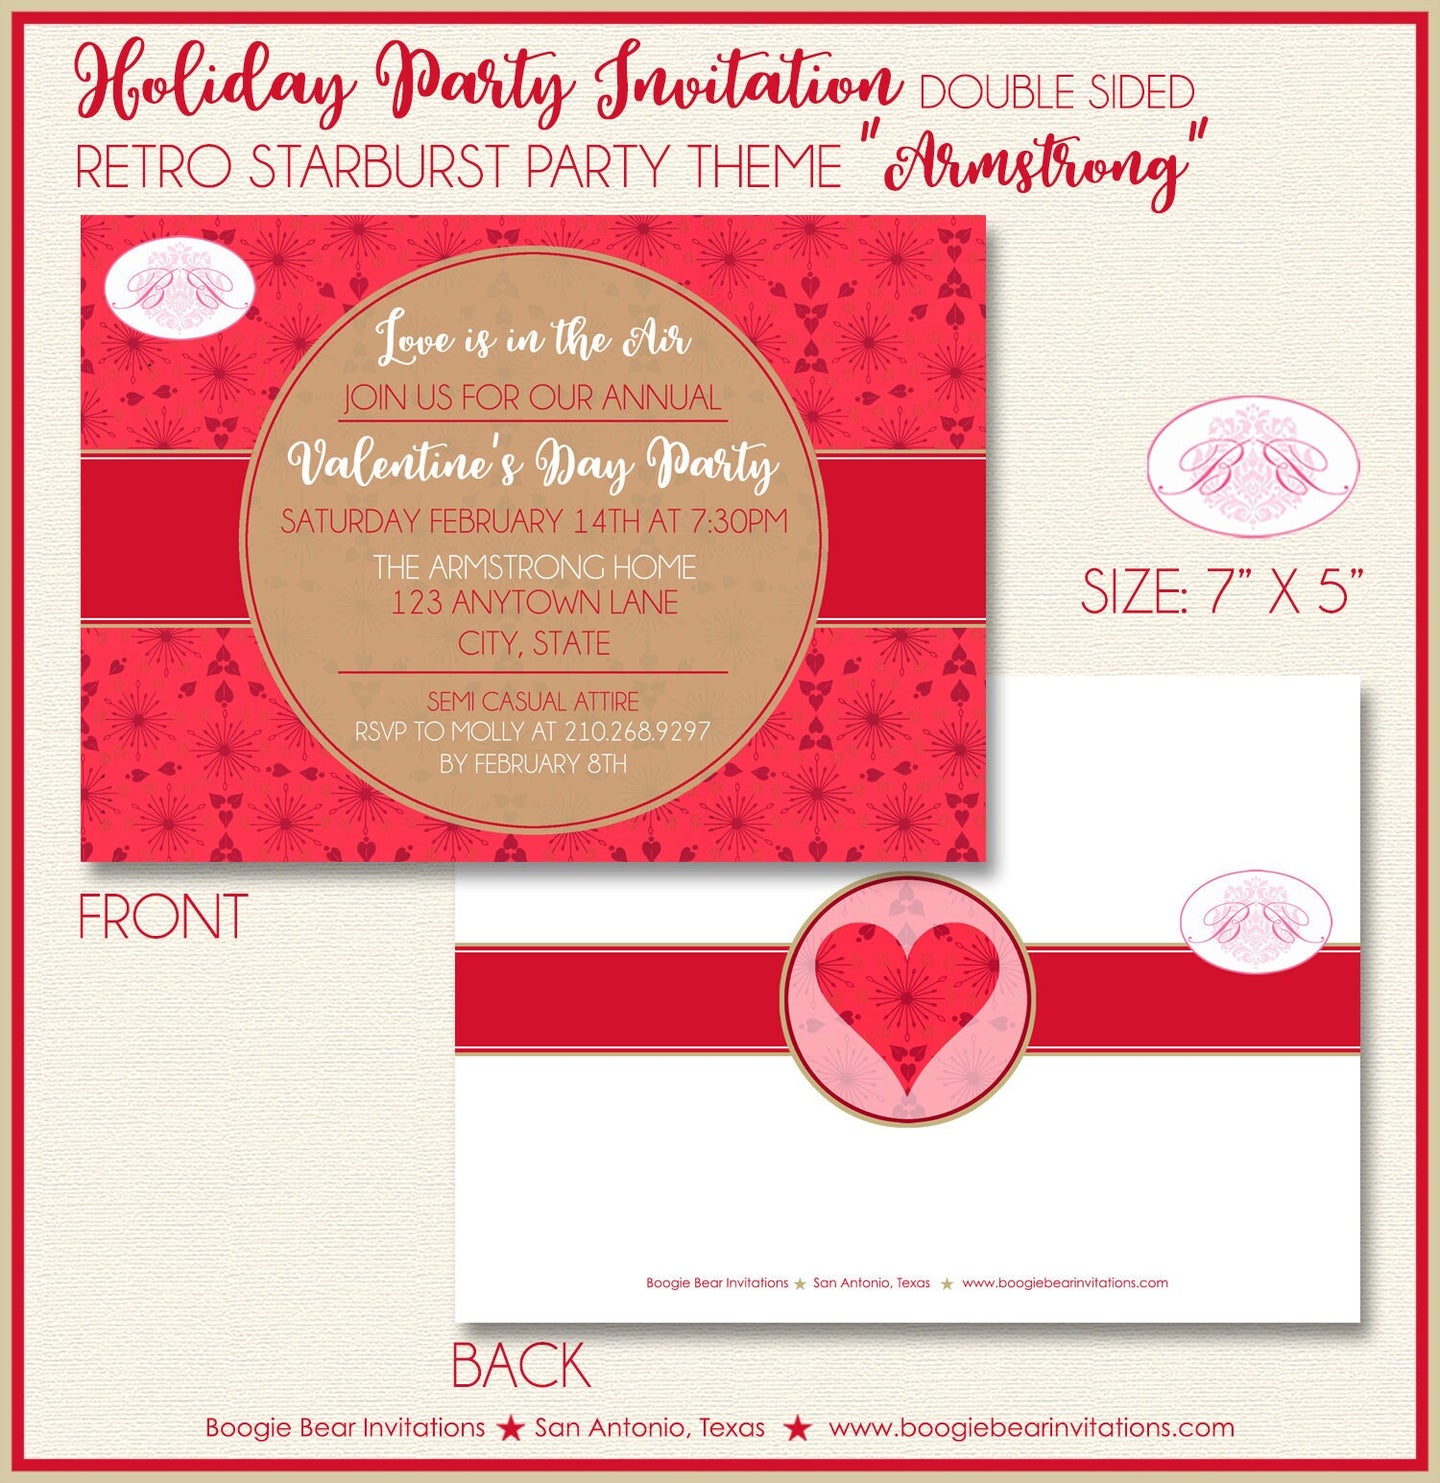 Retro Starburst Valentine's Party Invitation Day Radial Red Gold Heart Boogie Bear Invitations Armstrong Theme Paperless Printable Printed